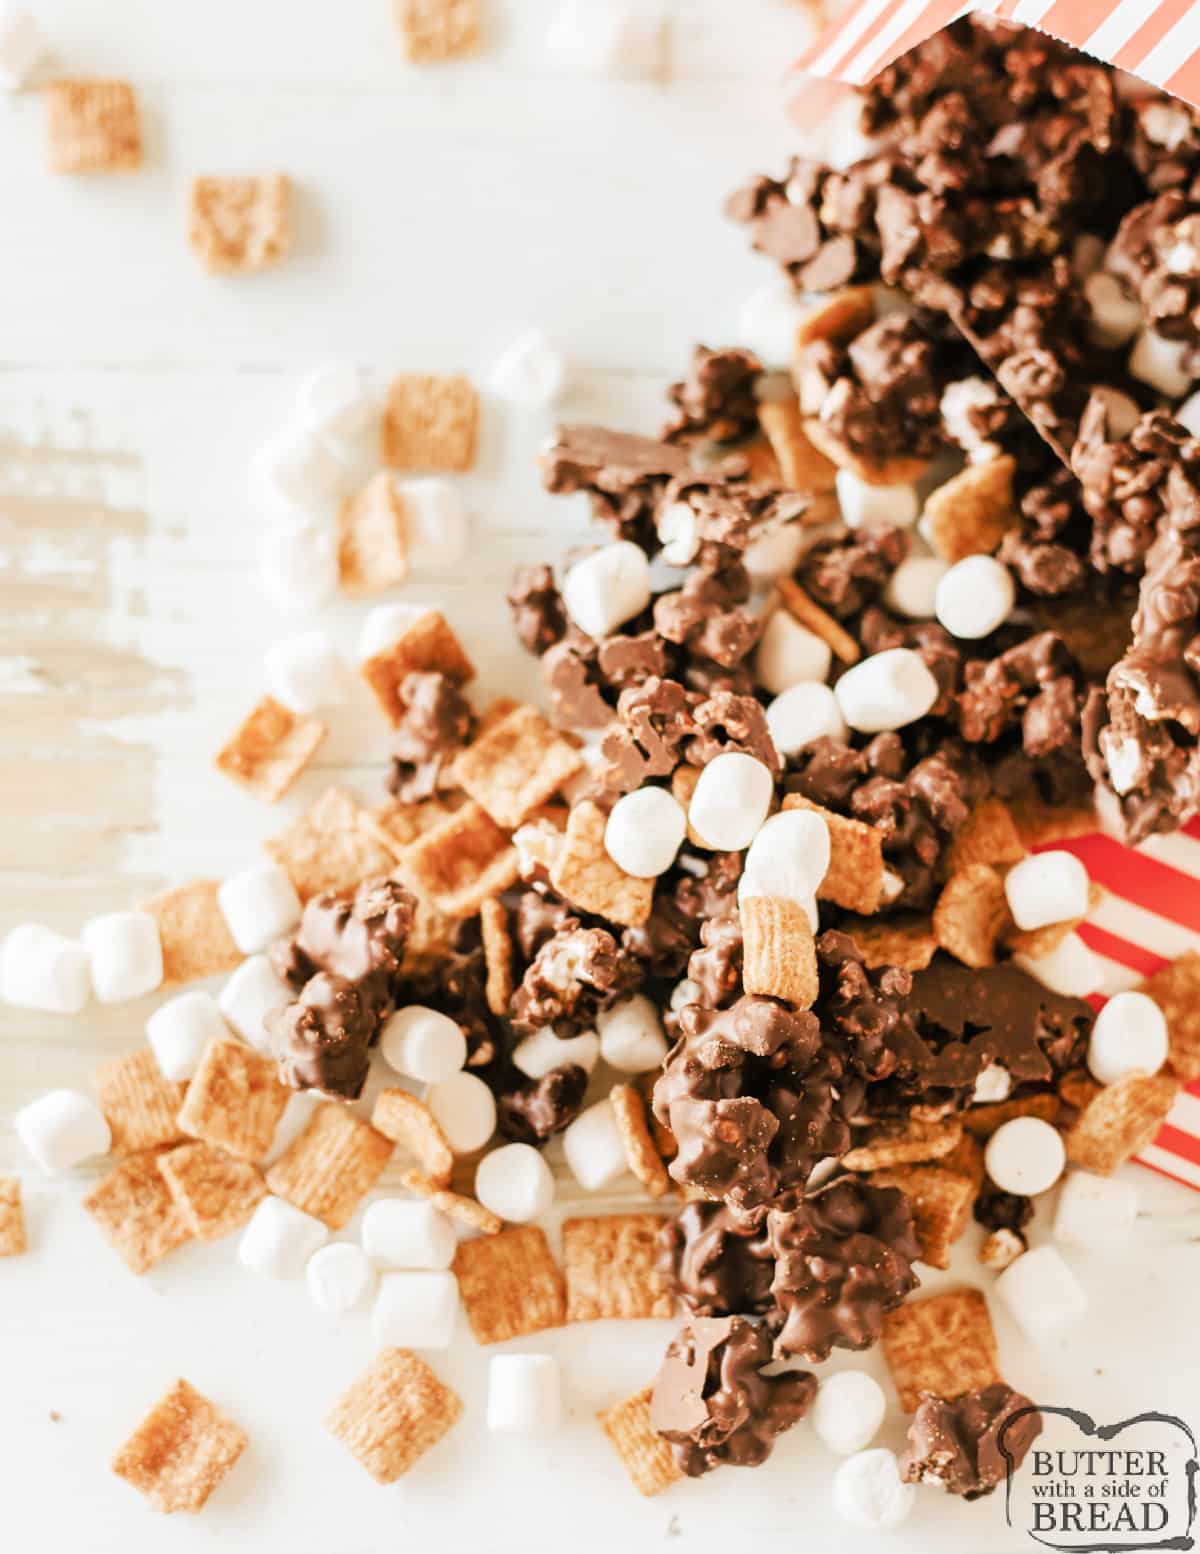 Popcorn mixed with chocolate, marshmallows, and cereal.